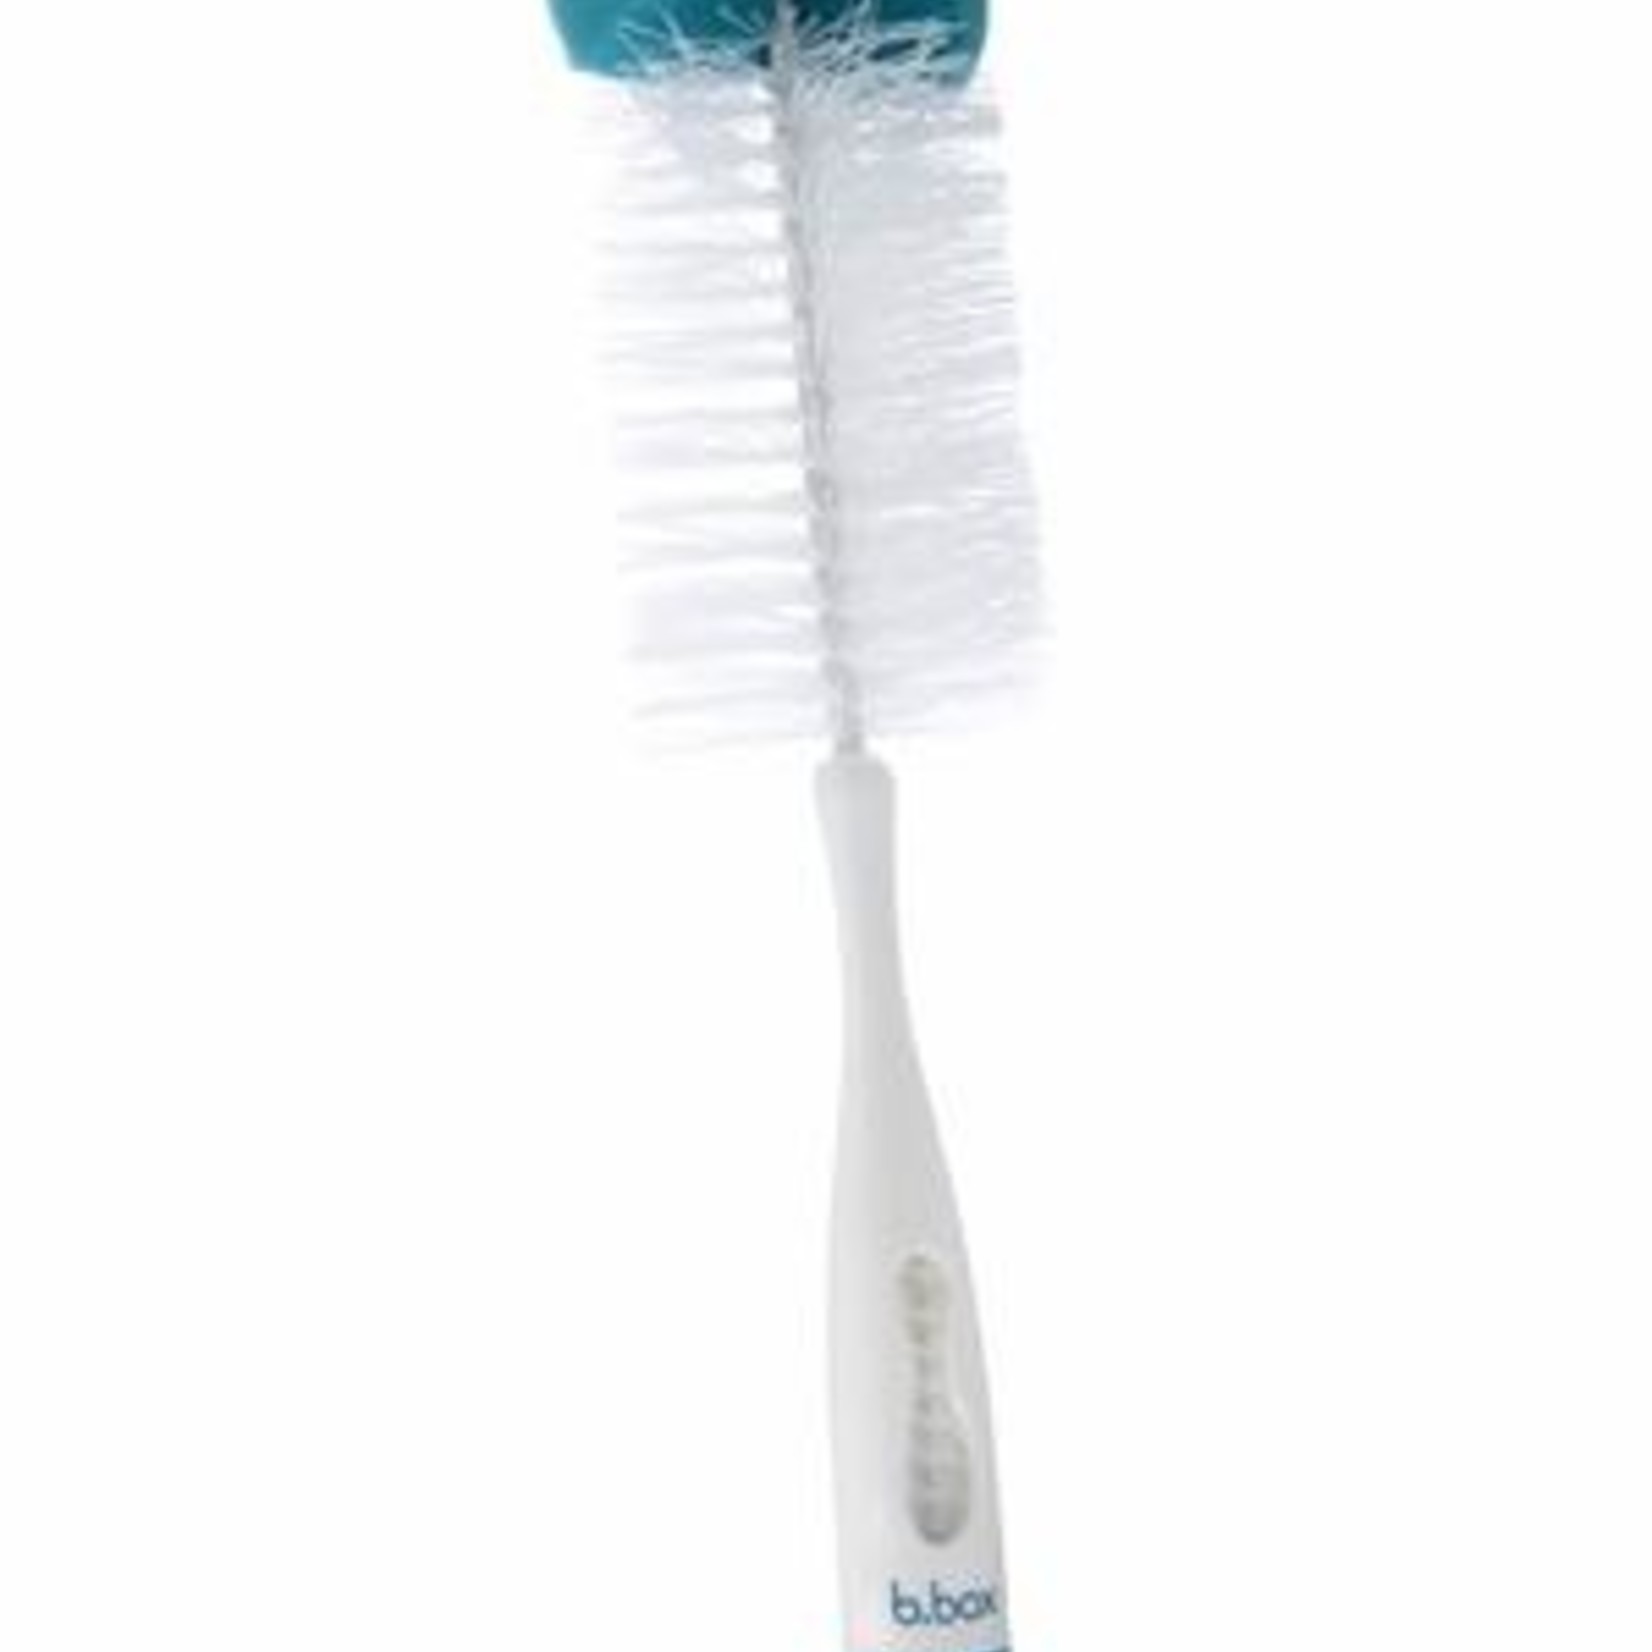 B.Box 2 in 1 brush and teat cleaner